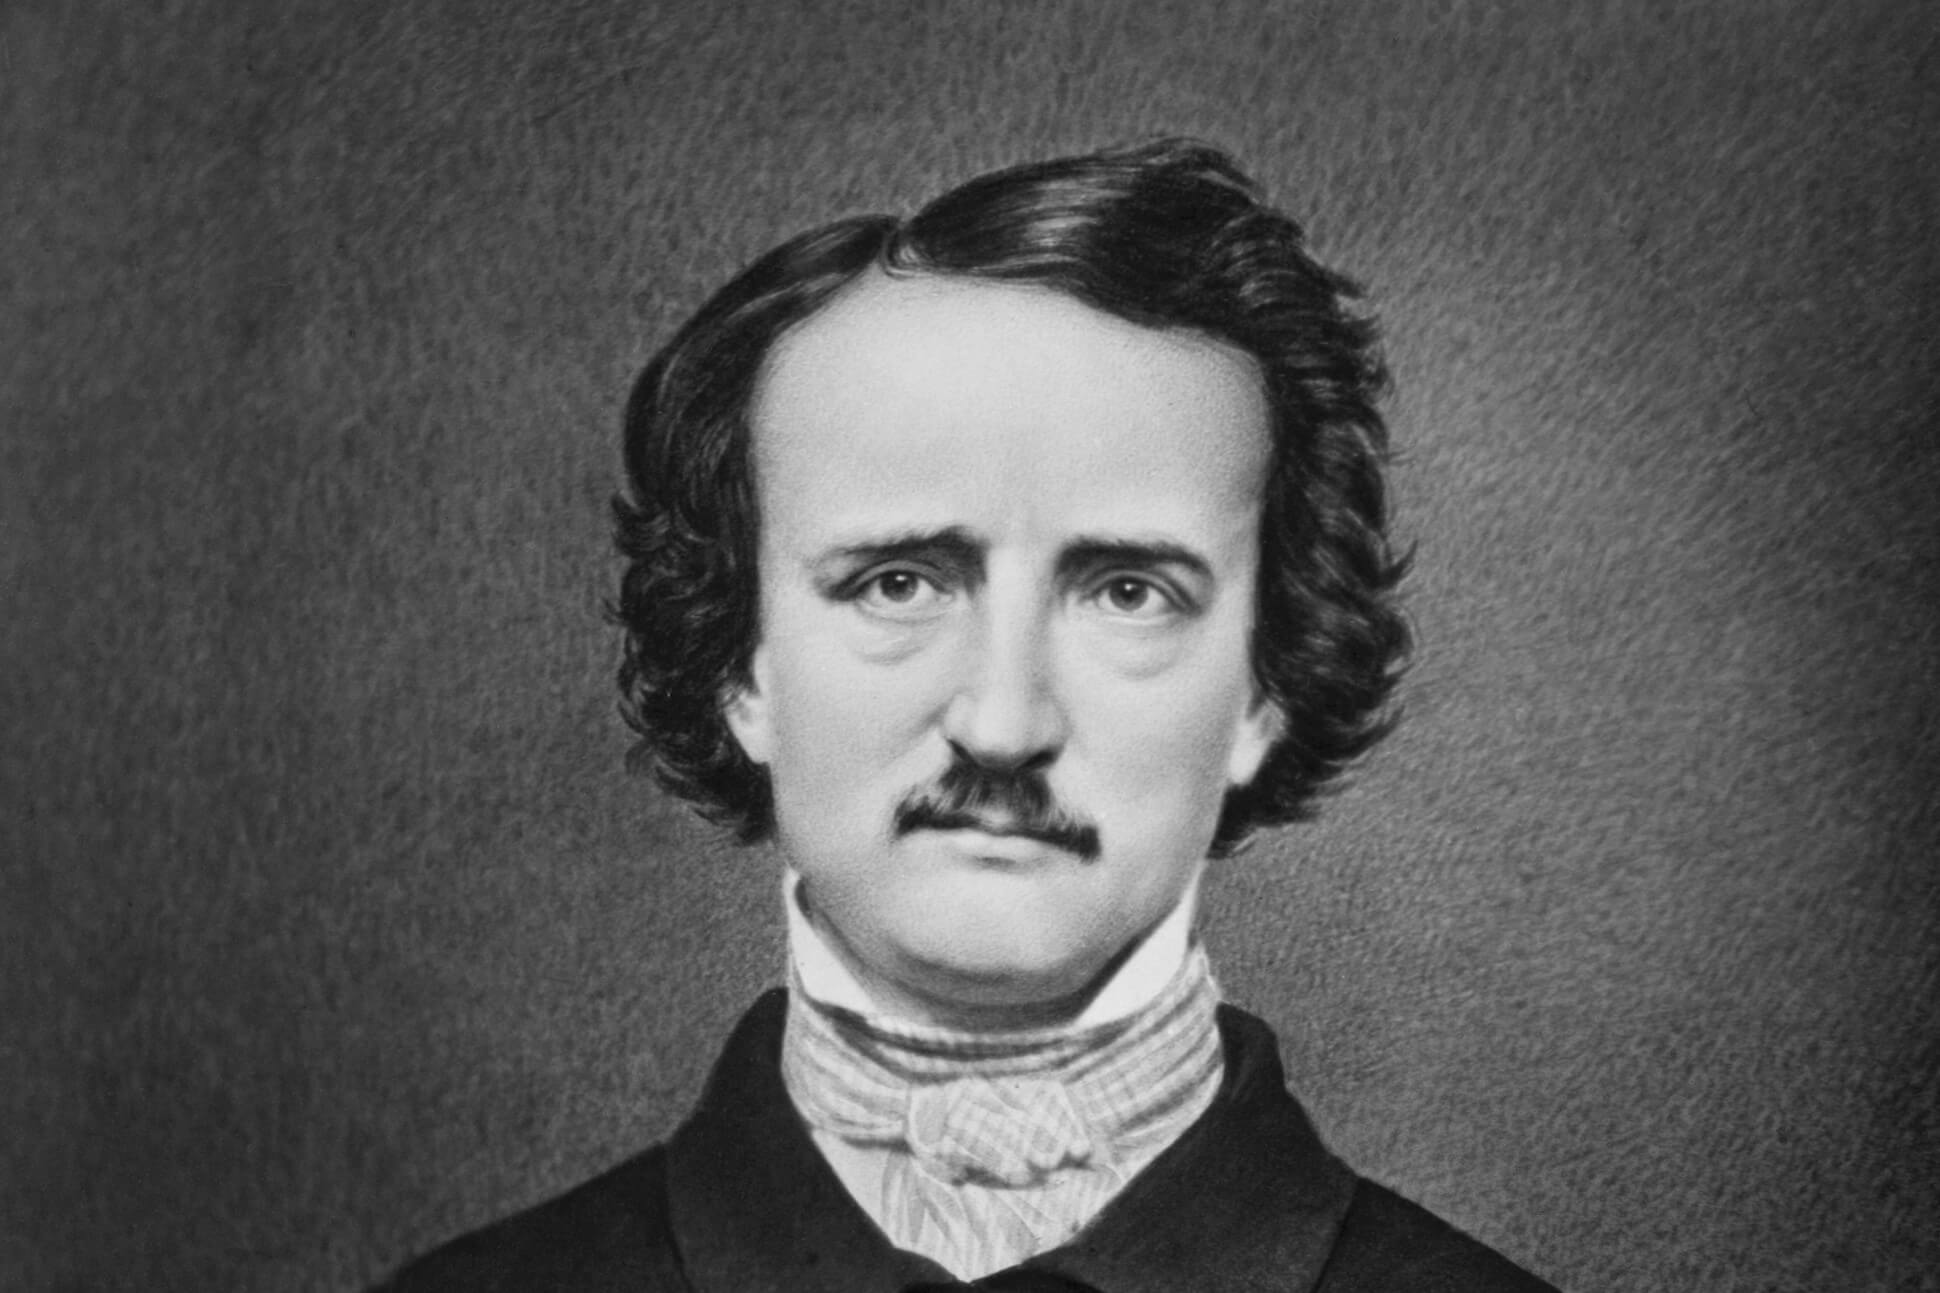 Gothic poet and writer Edgar Allan Poe wrote short story The Fall of the House of Usher